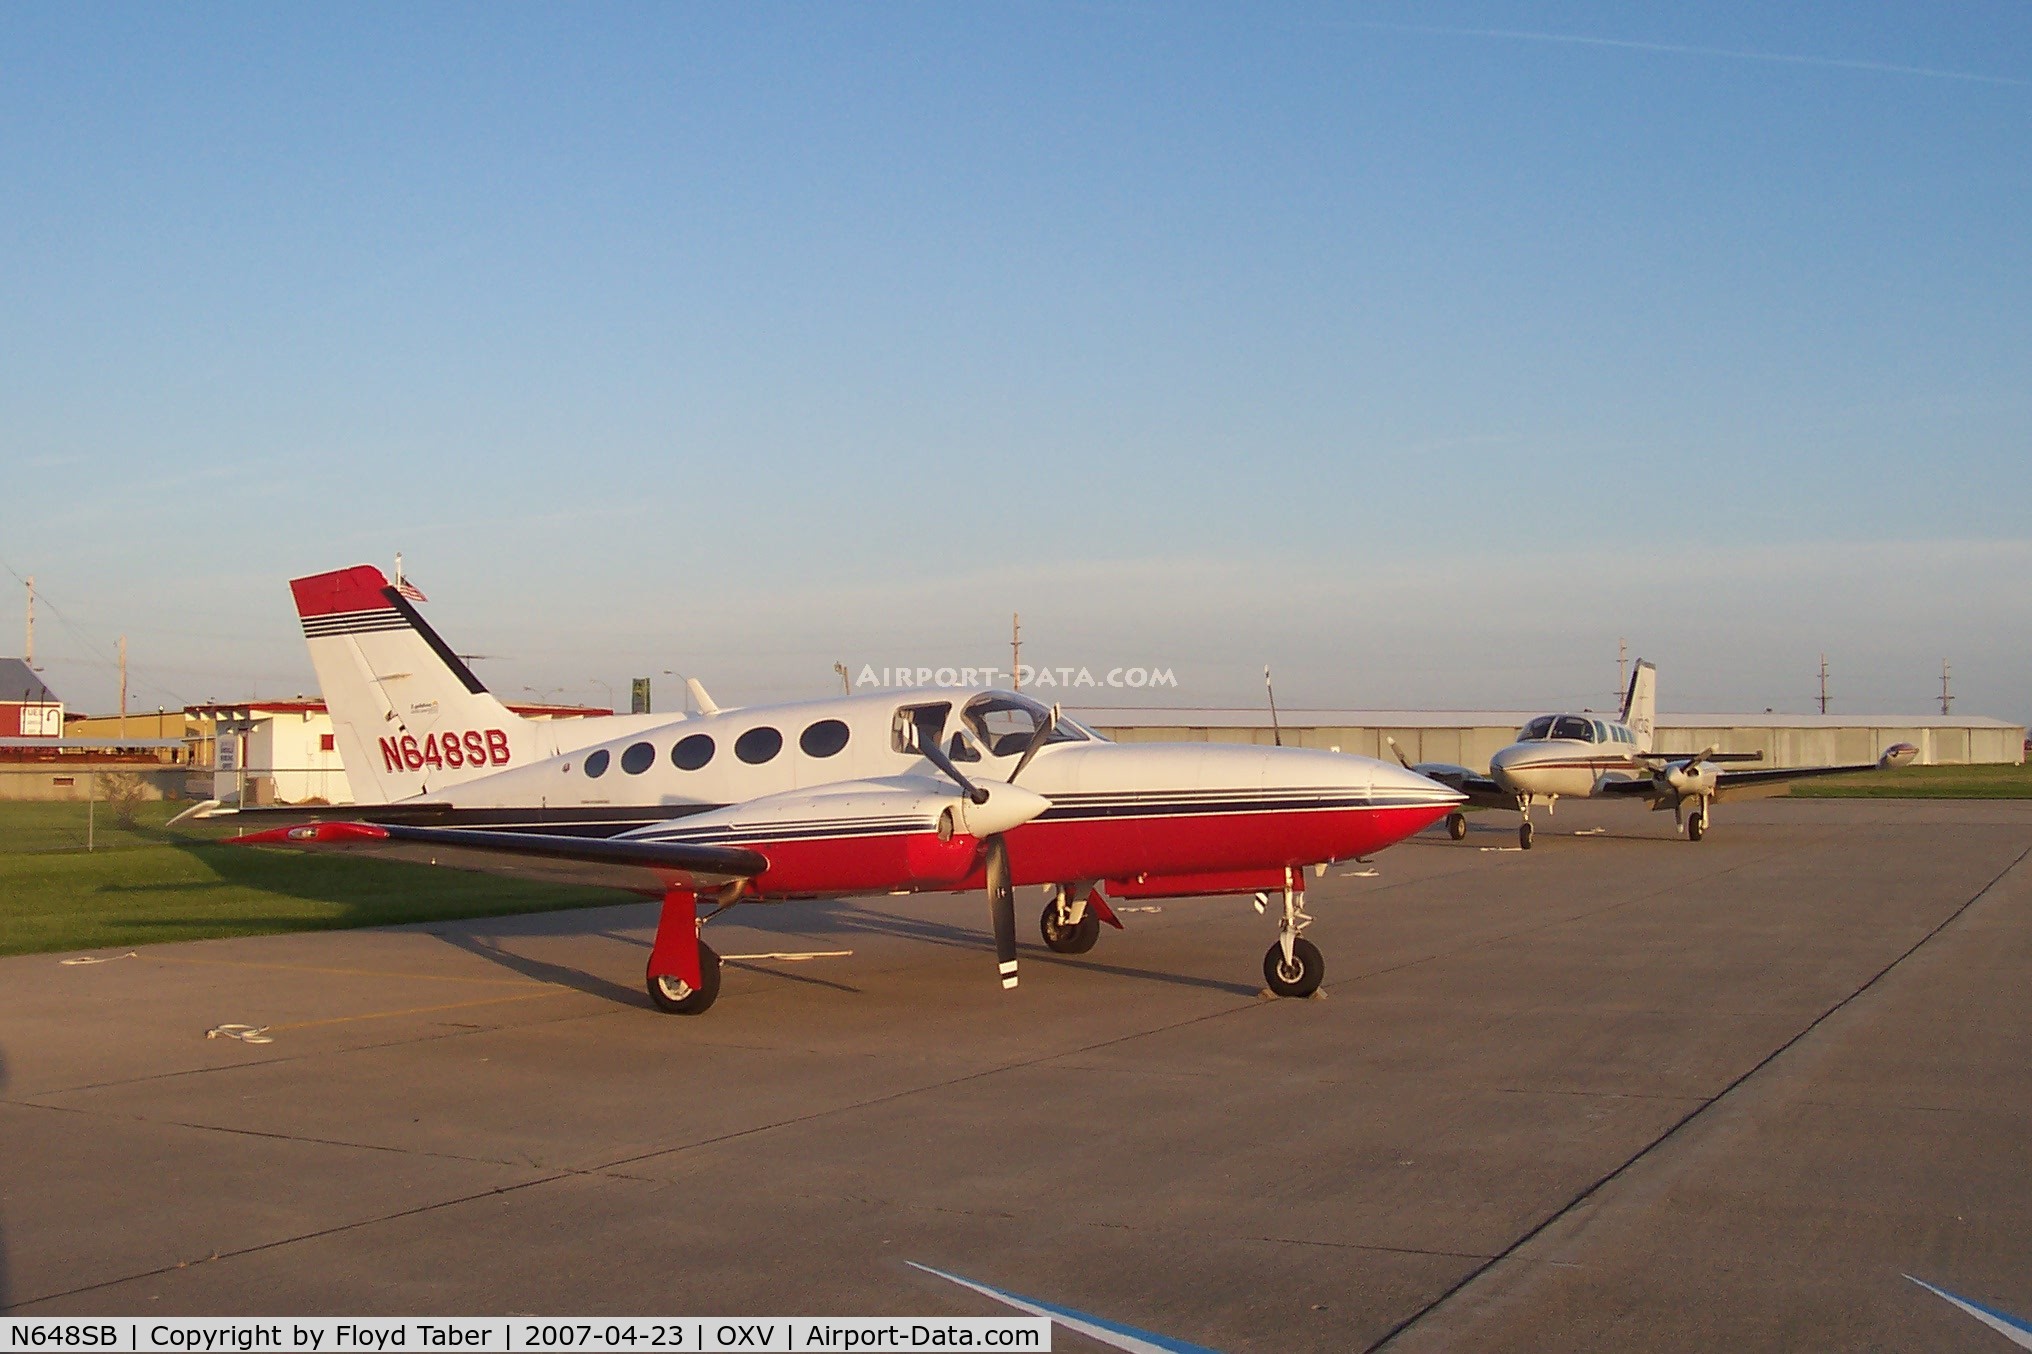 N648SB, 1979 Cessna 421C Golden Eagle C/N 421C0648, Short stay for fuel and Race Car Testing